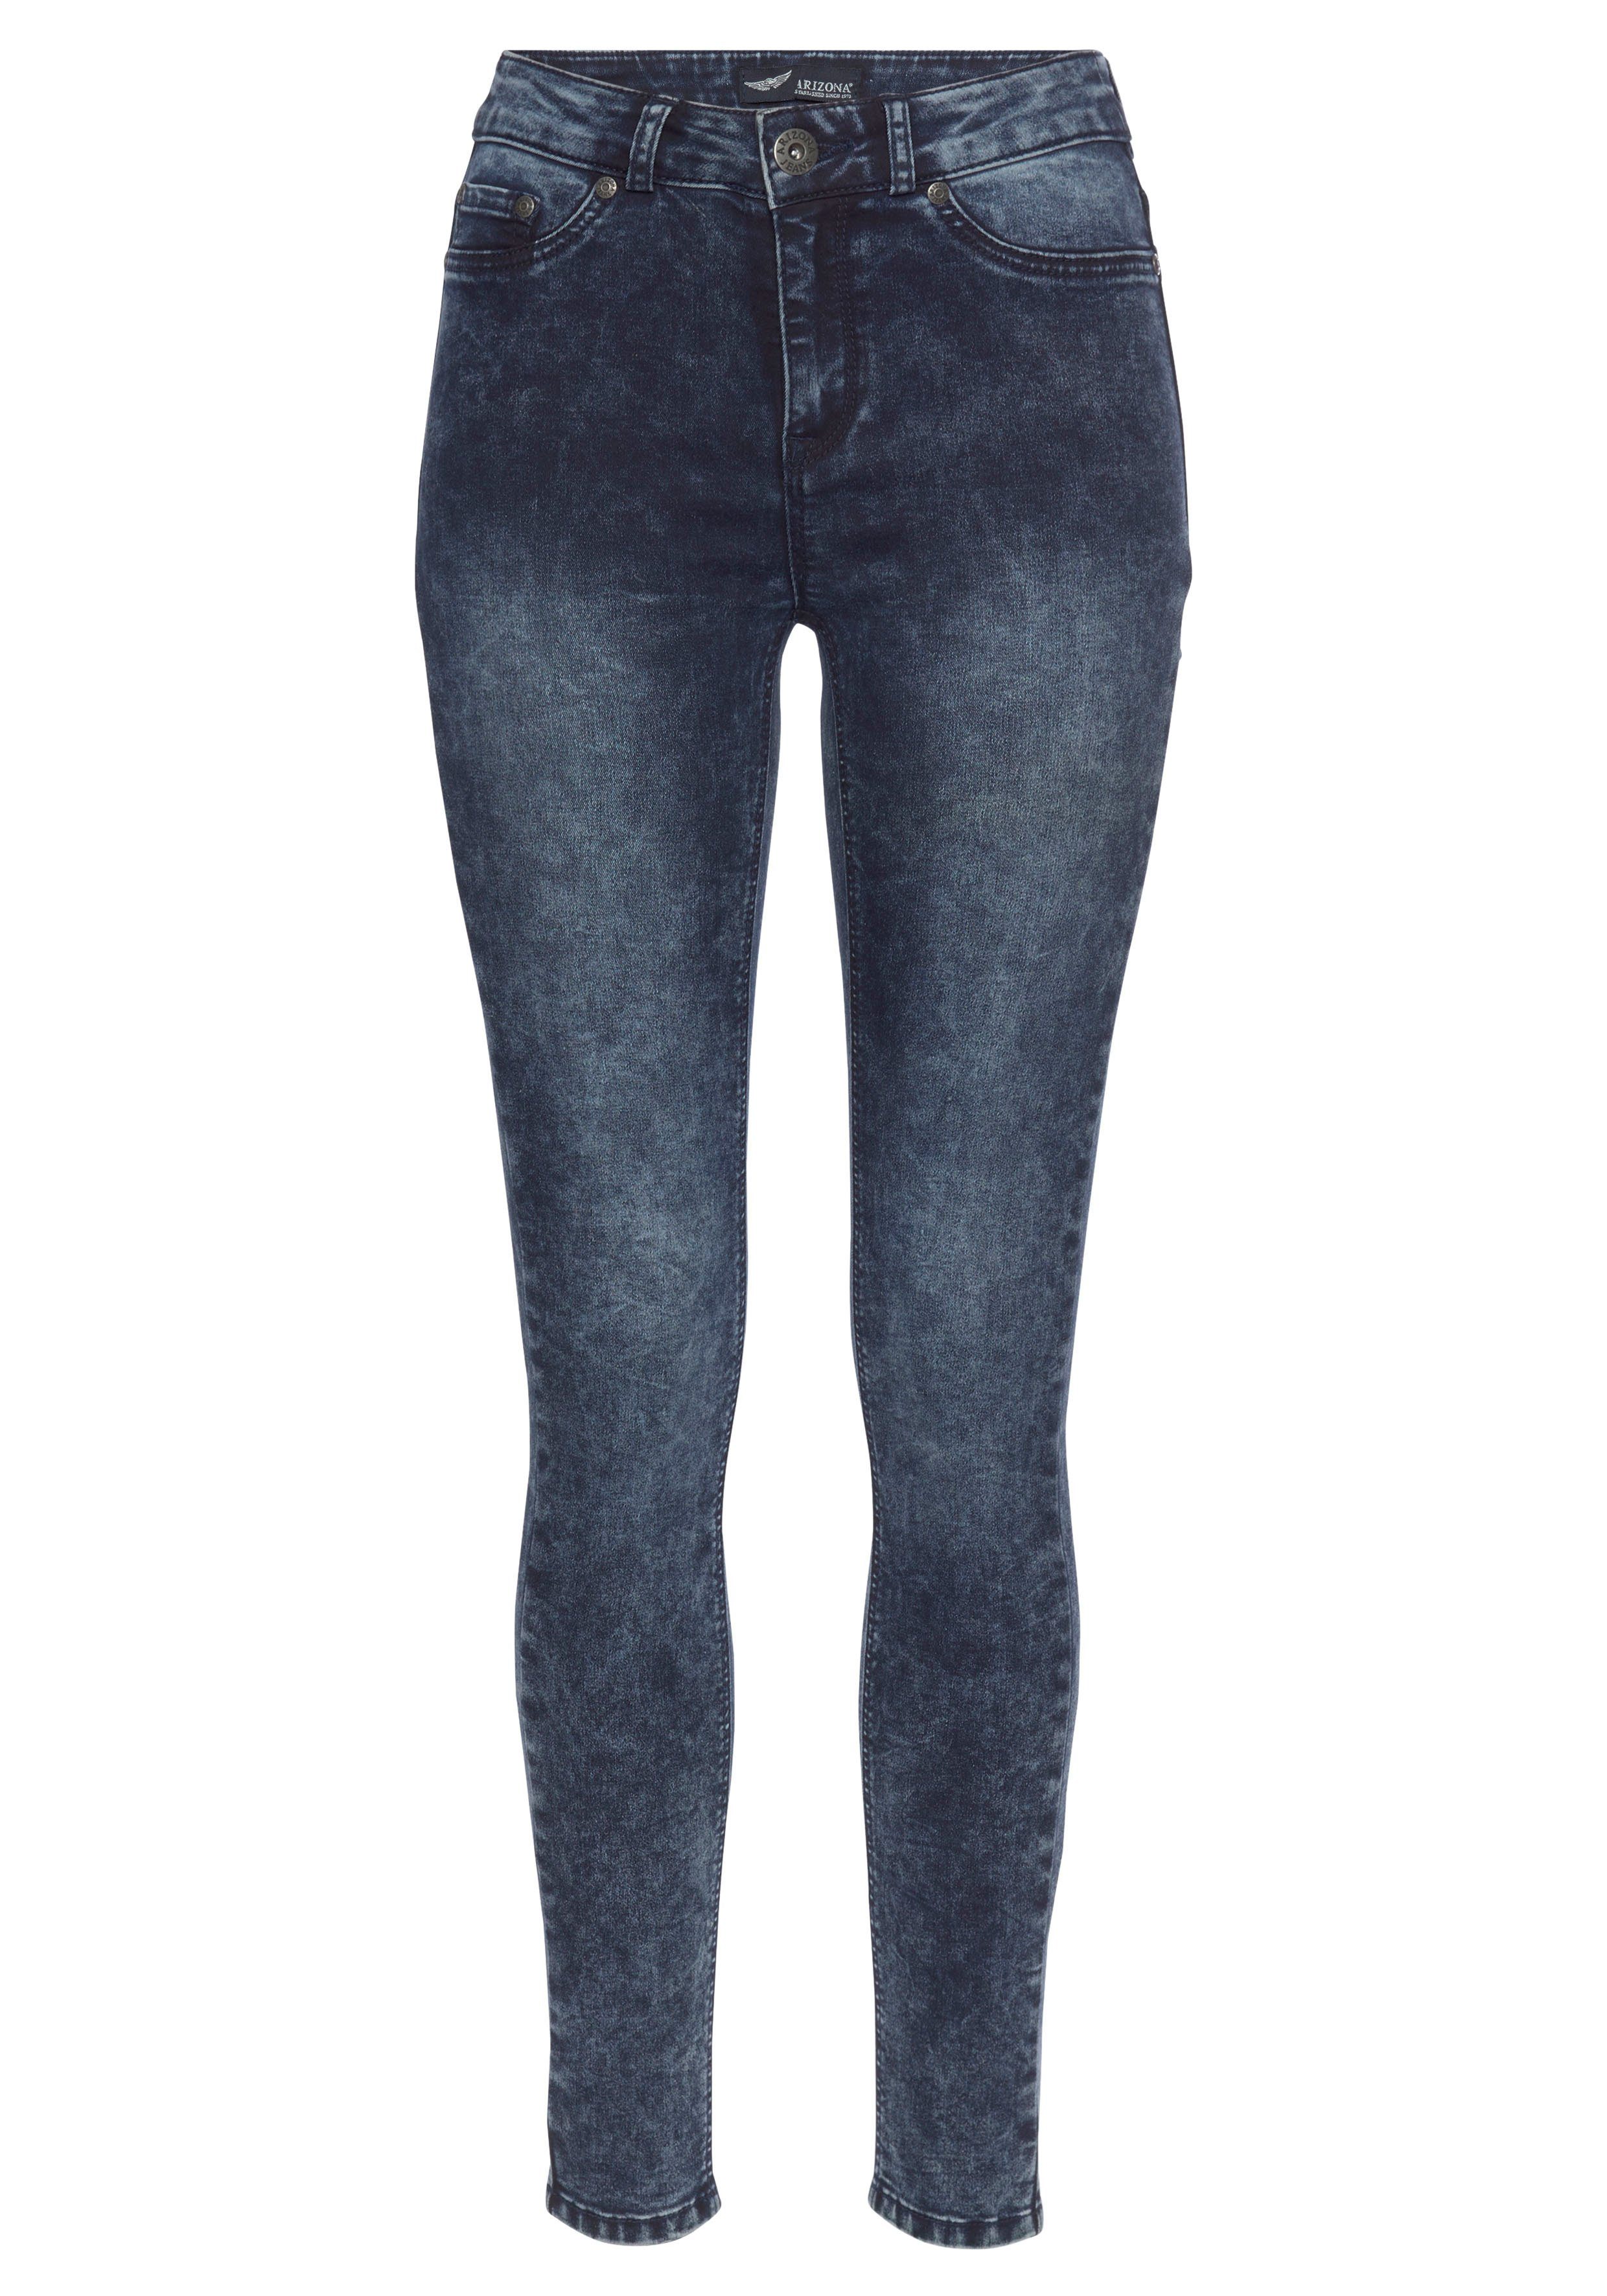 washed Moonwashed Jeans Ultra Stretch moon Arizona Skinny-fit-Jeans darkblue-moonwashed